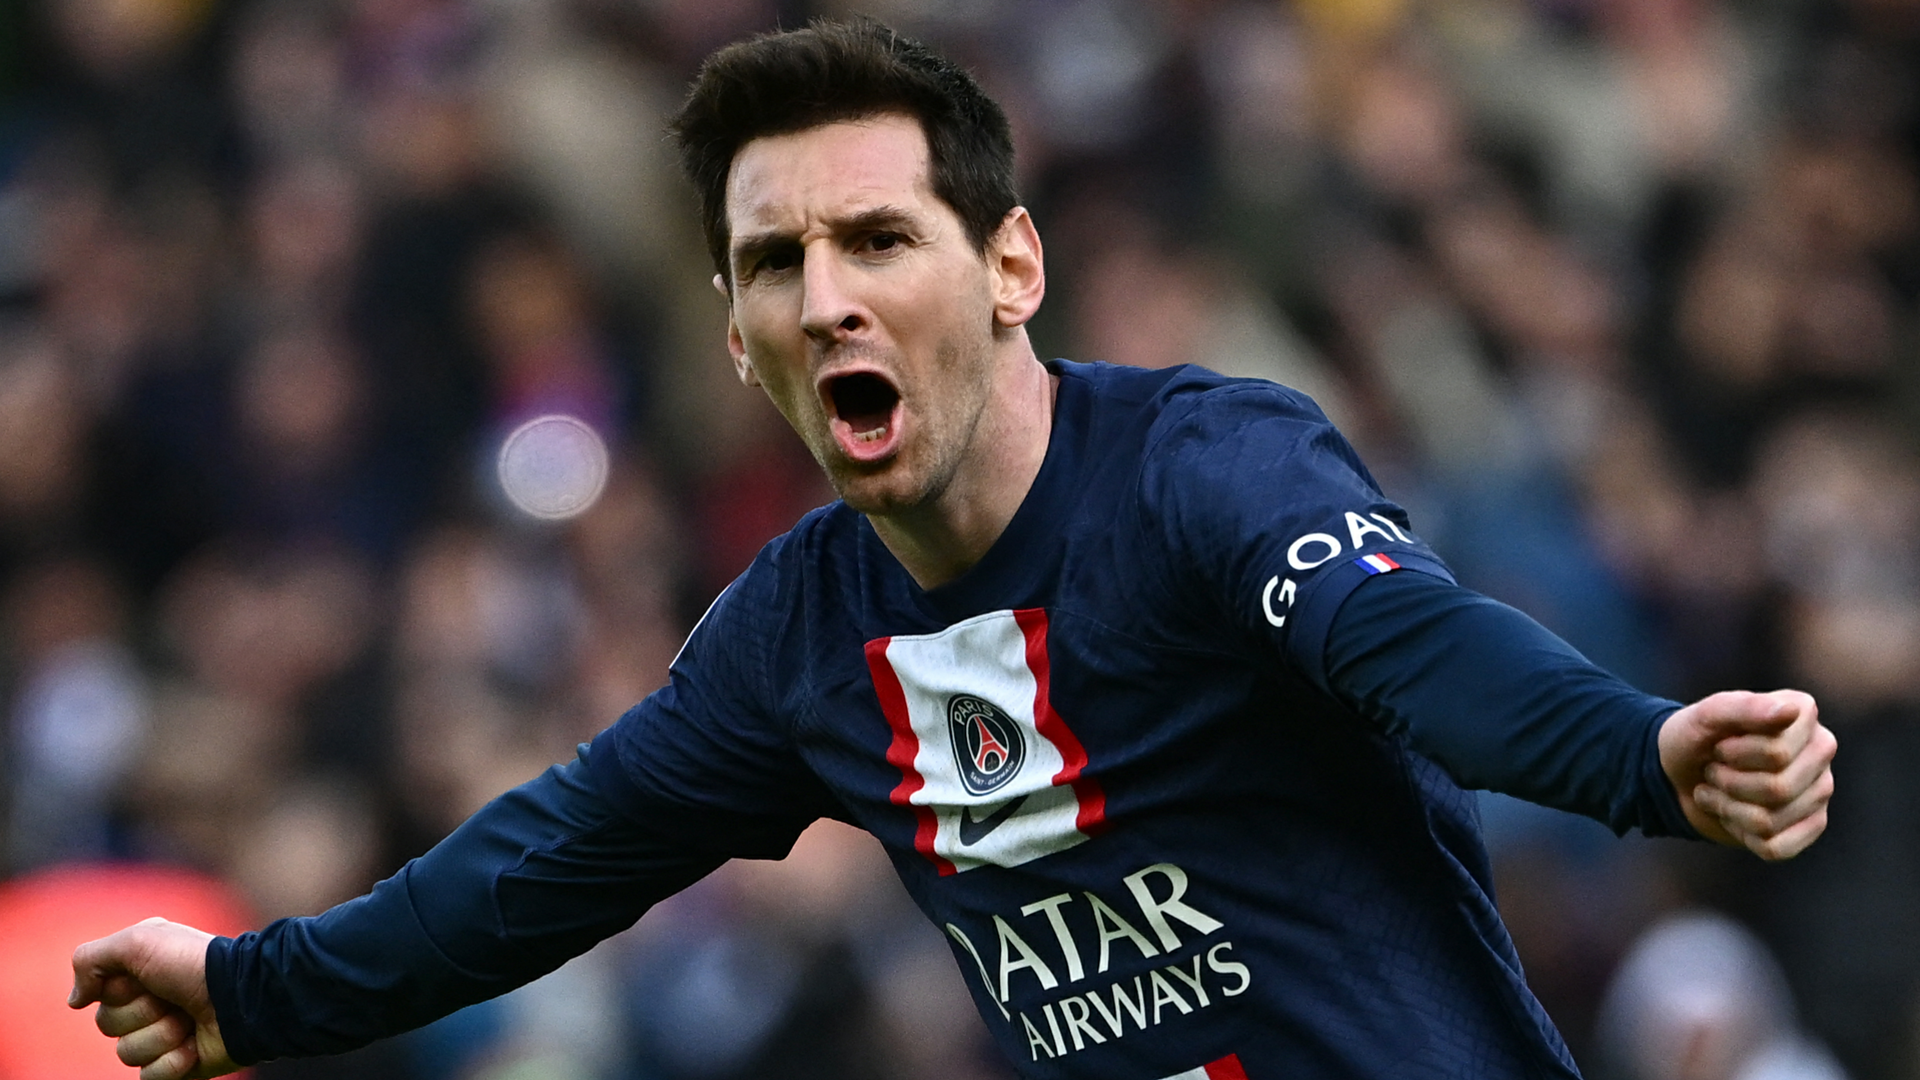 WATCH: Lionel Messi wins seven-goal thriller for PSG with spectacular free-kick in 95th minute - Goal.com